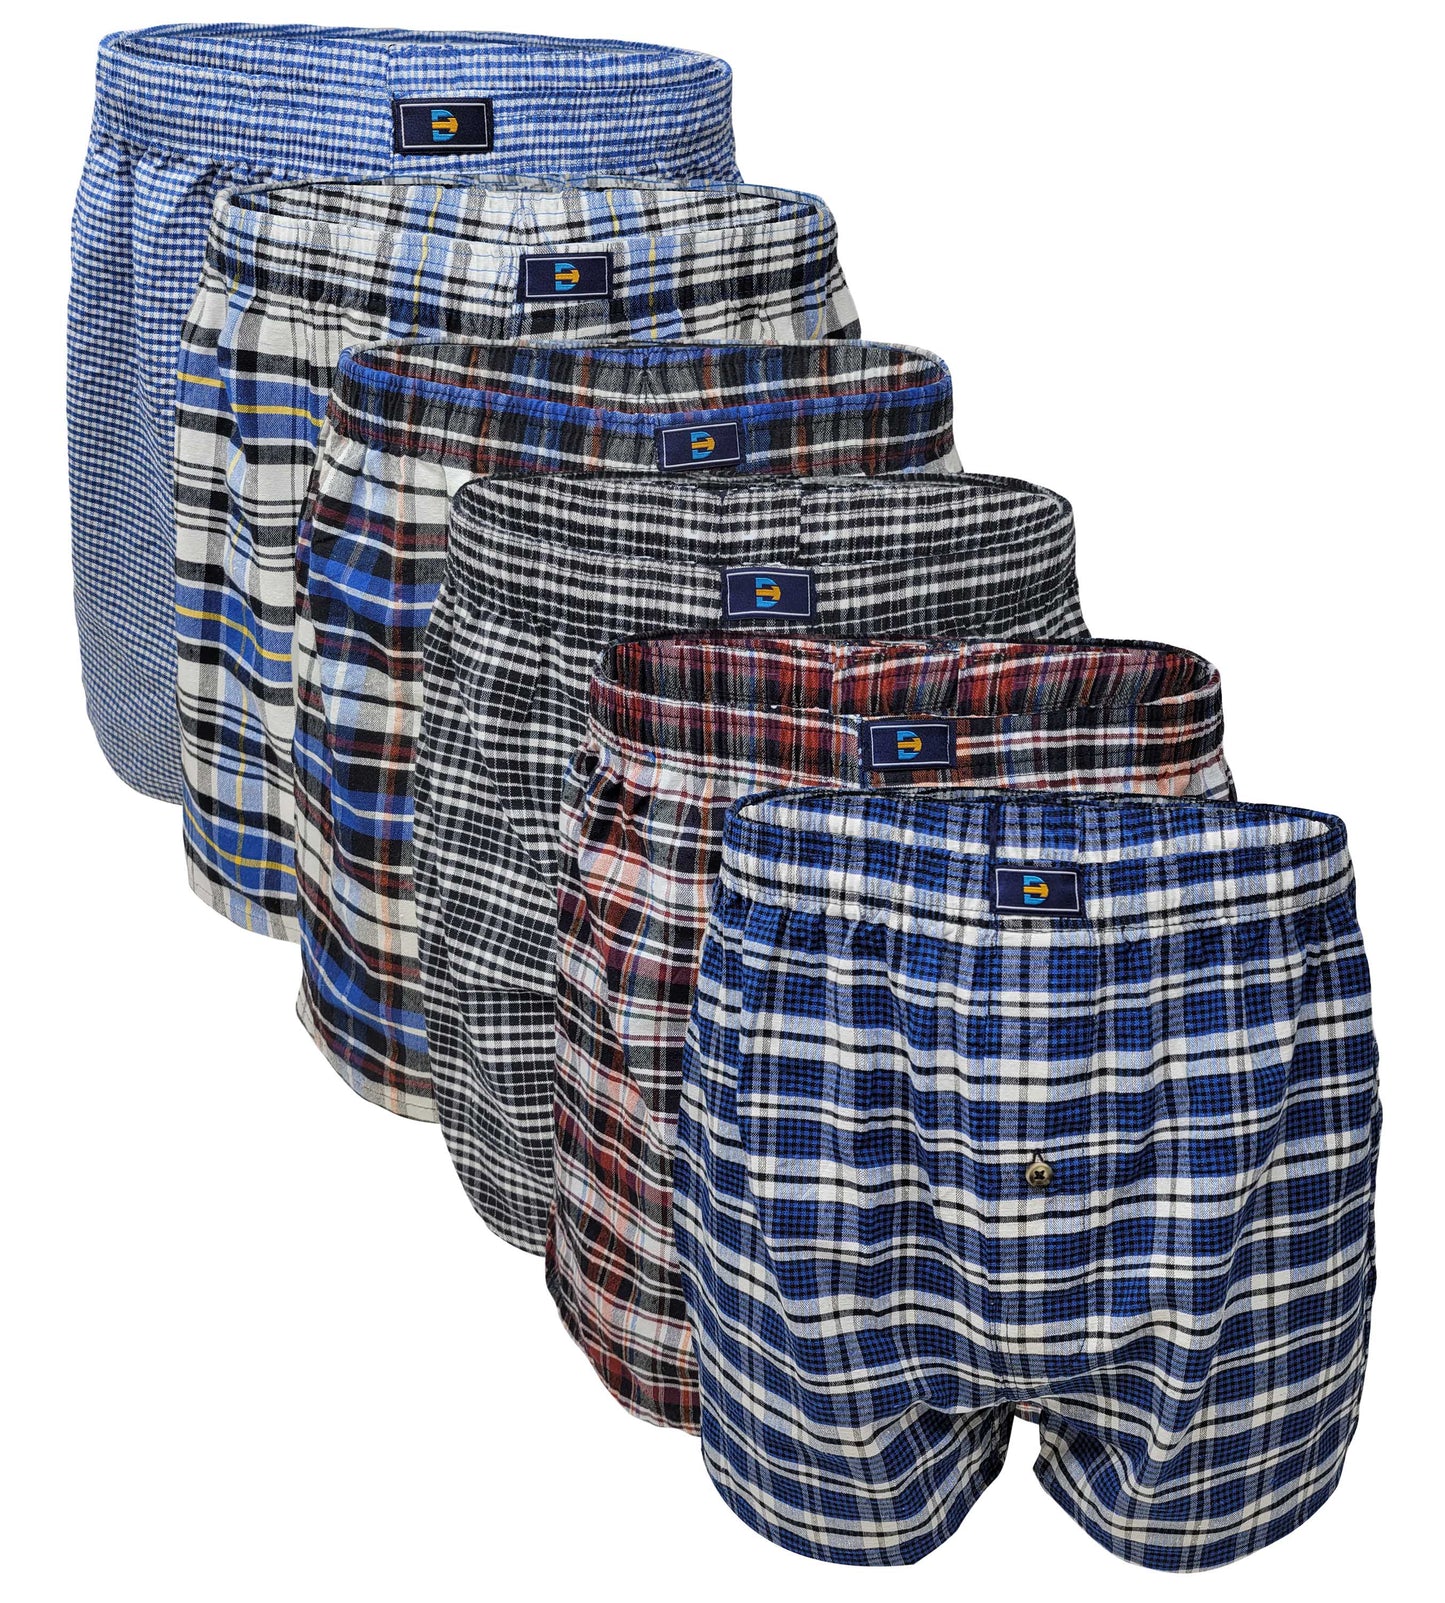 Men's True Big and Tall USA Classic Design Plaid Woven Boxer Shorts Underwear (6 Pack)